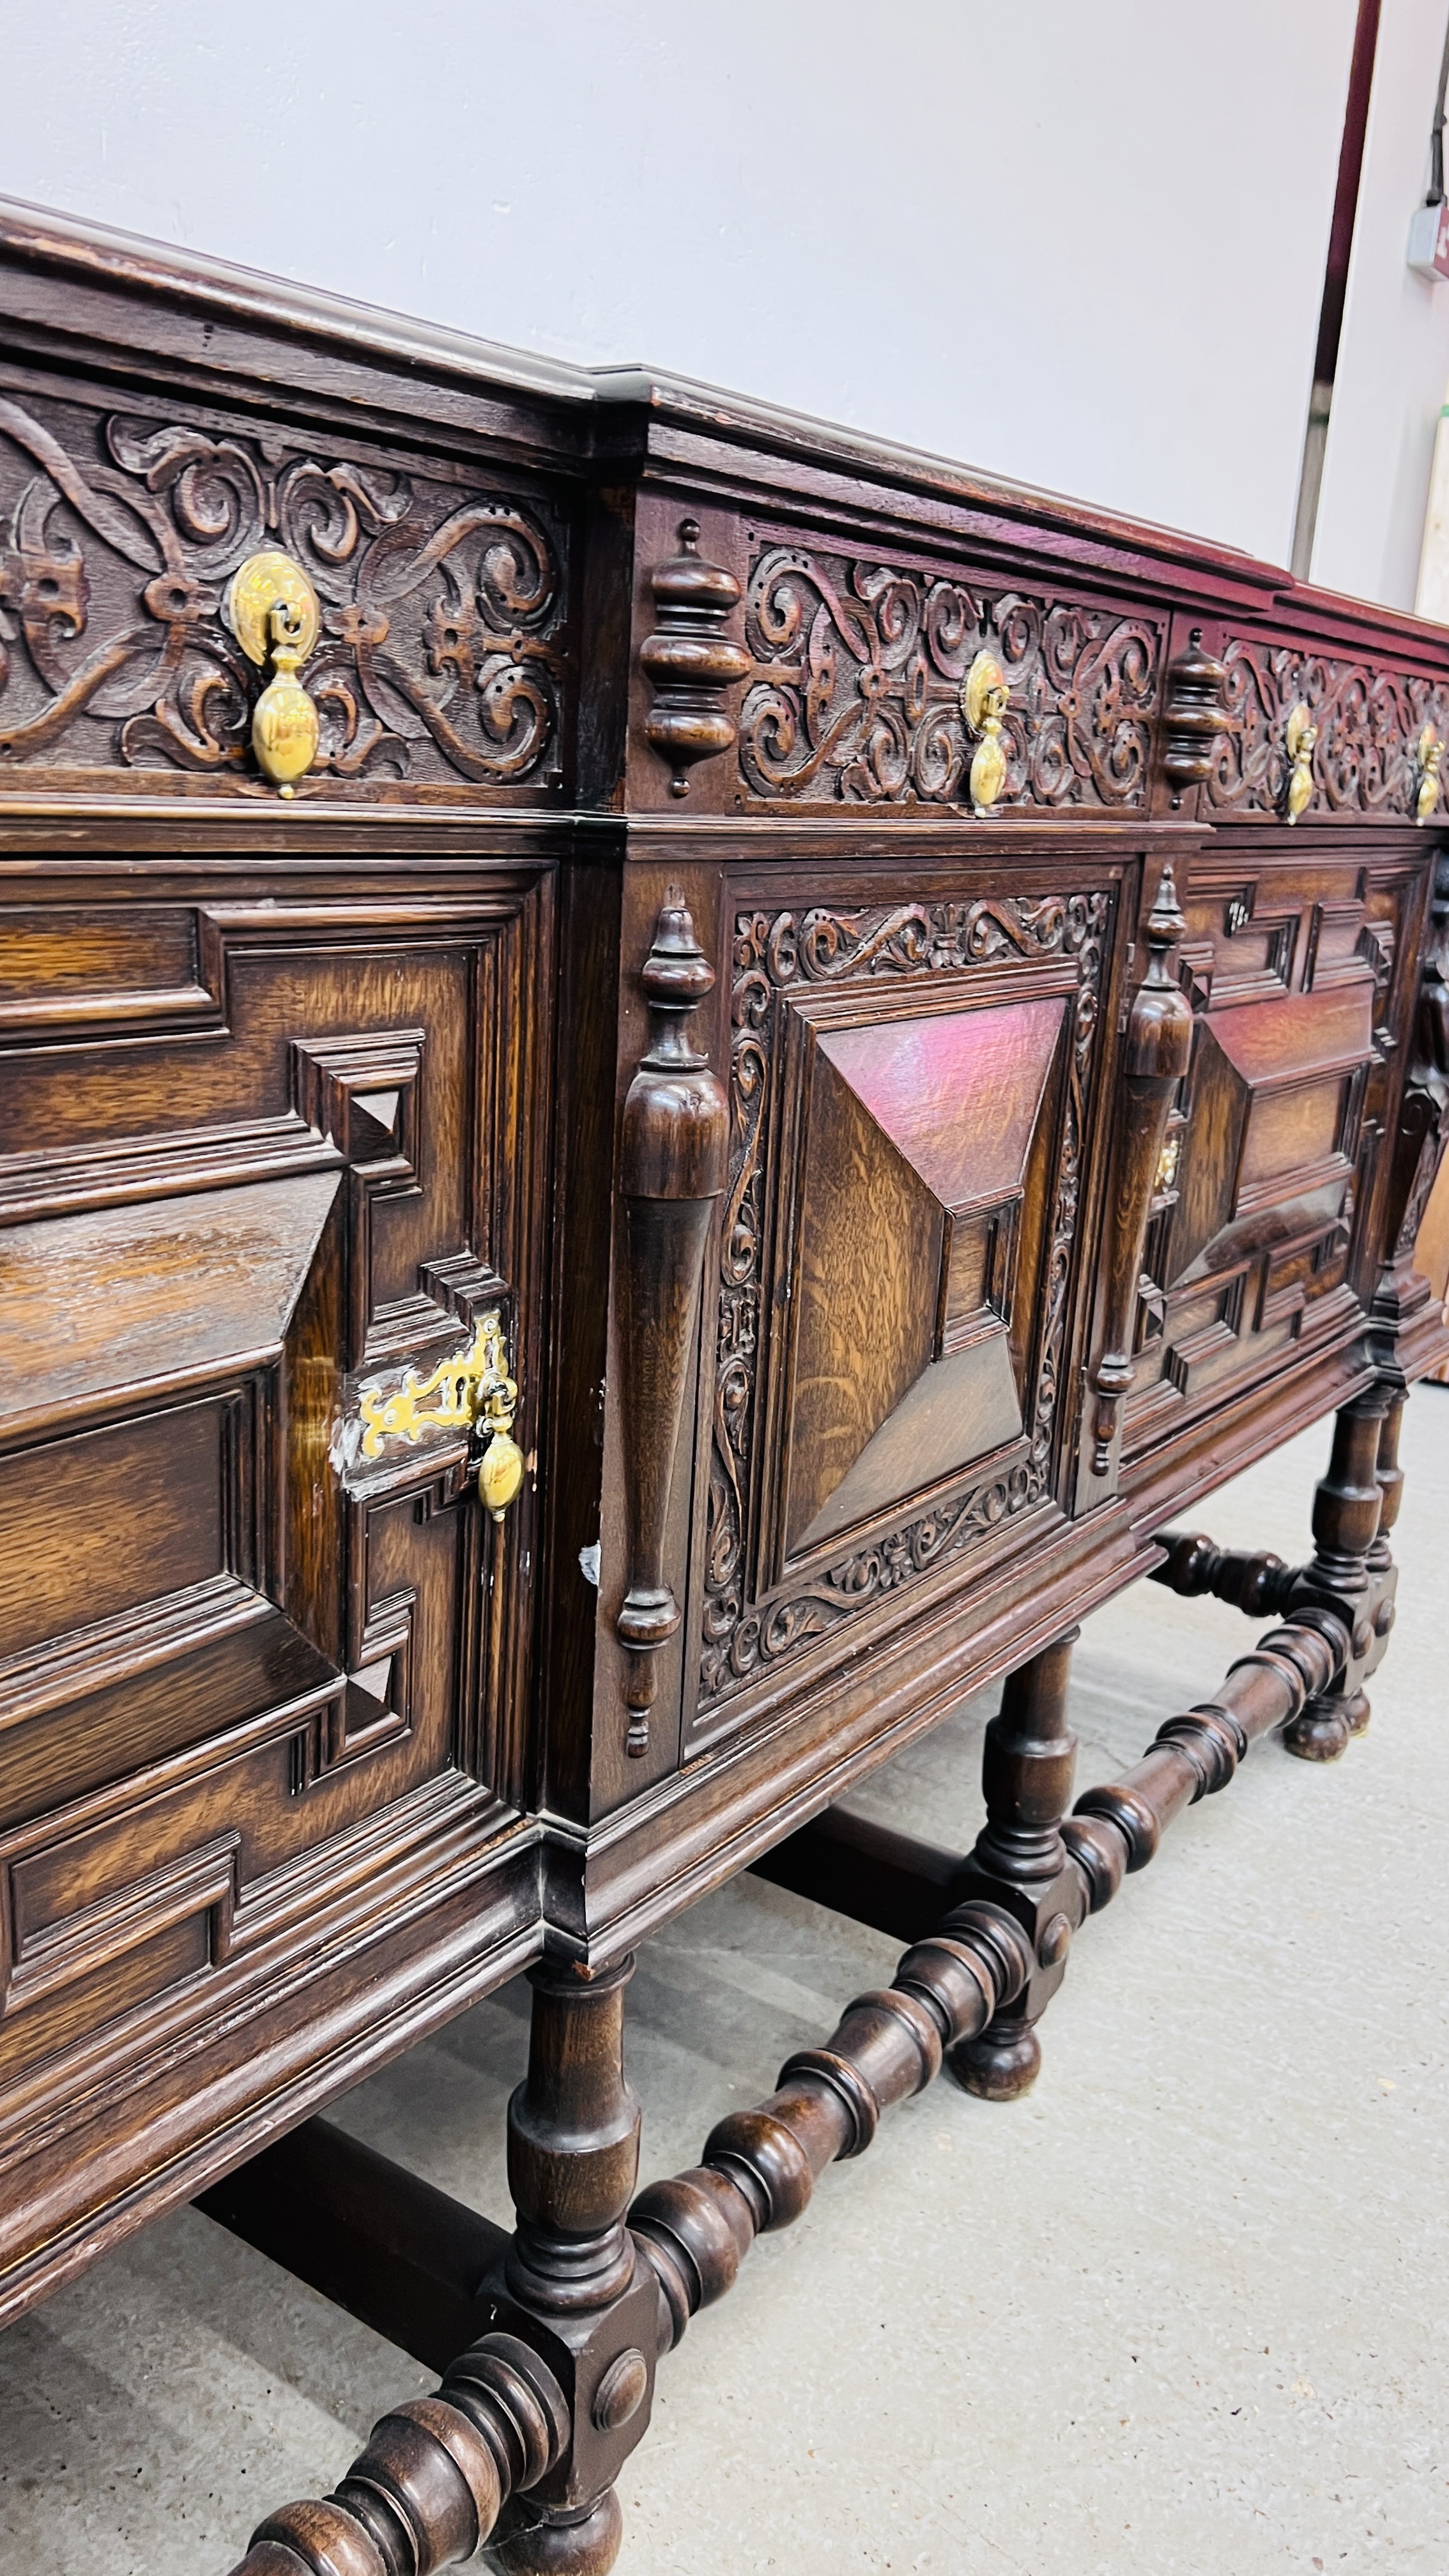 A C20TH CARVED OAK SIDEBOARD IN C17TH STYLE BY HAMPTONS OF LONDON W 198CM, D 66CM, H 101CM. - Bild 12 aus 18